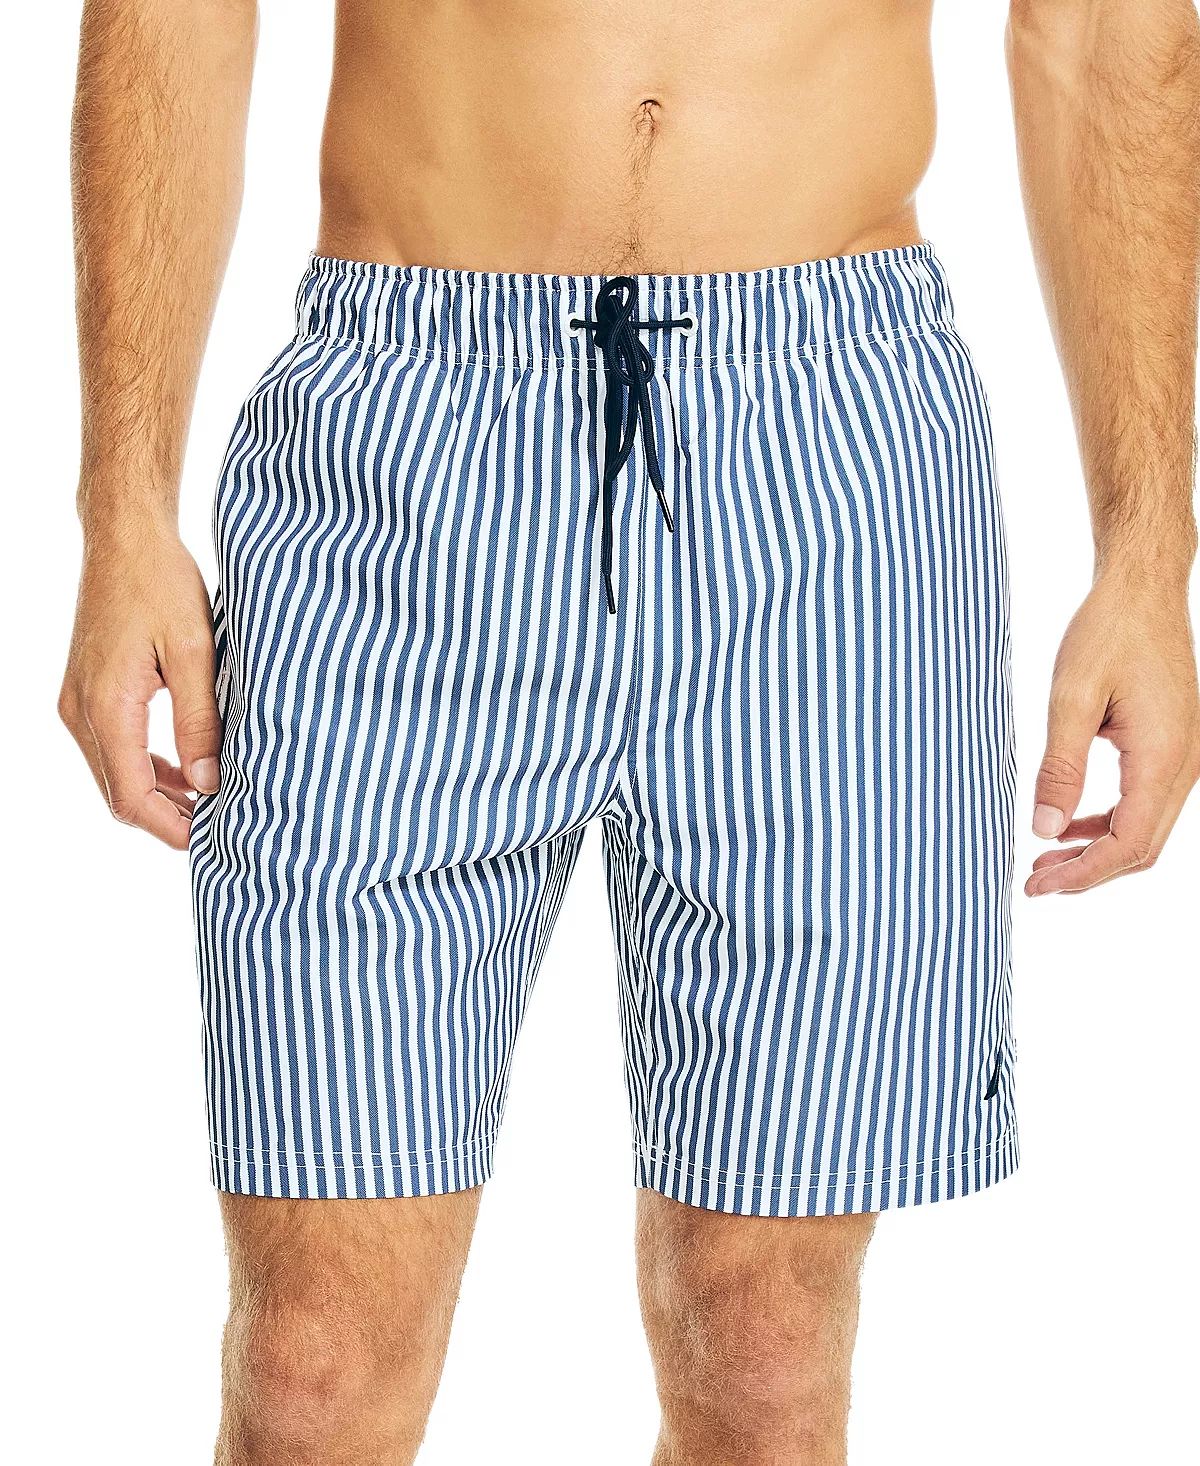 15 Swim Shorts You'll Need To Hit The Beach This Summer  Summer outfits  men, Beach outfit men, Mens summer outfits